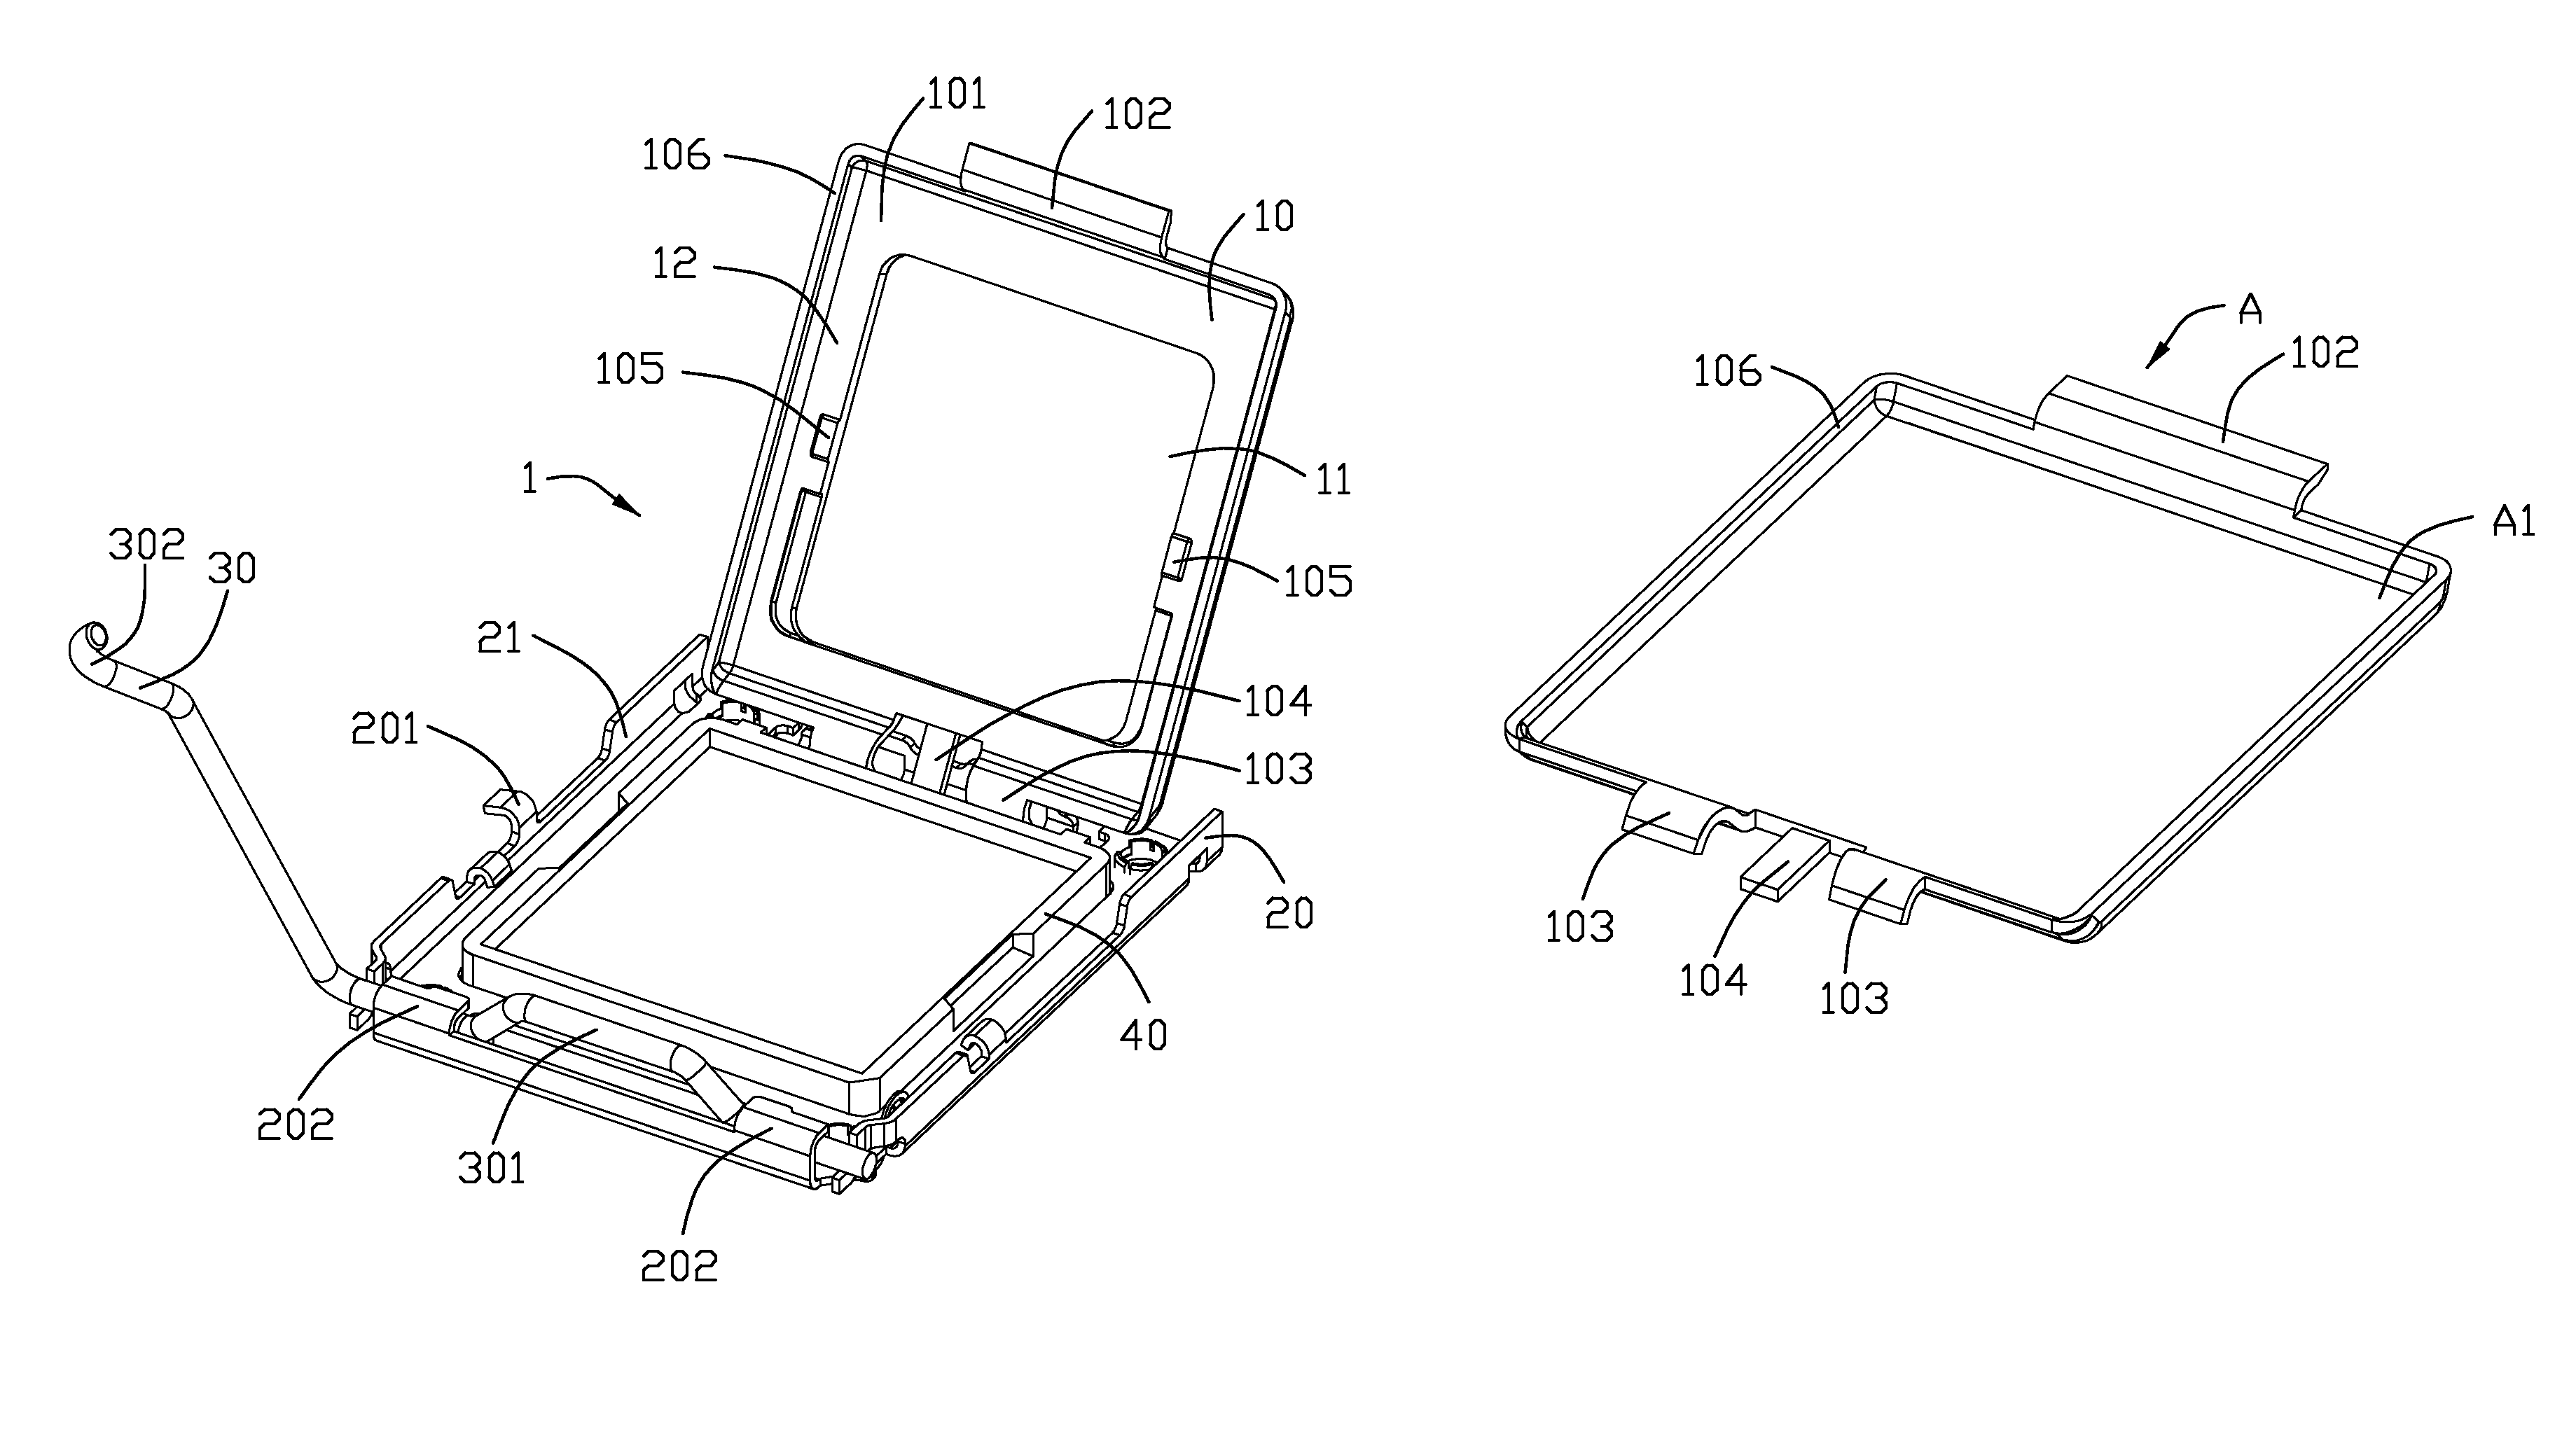 Load plate of land grid array socket connector and method of manufacturing the same